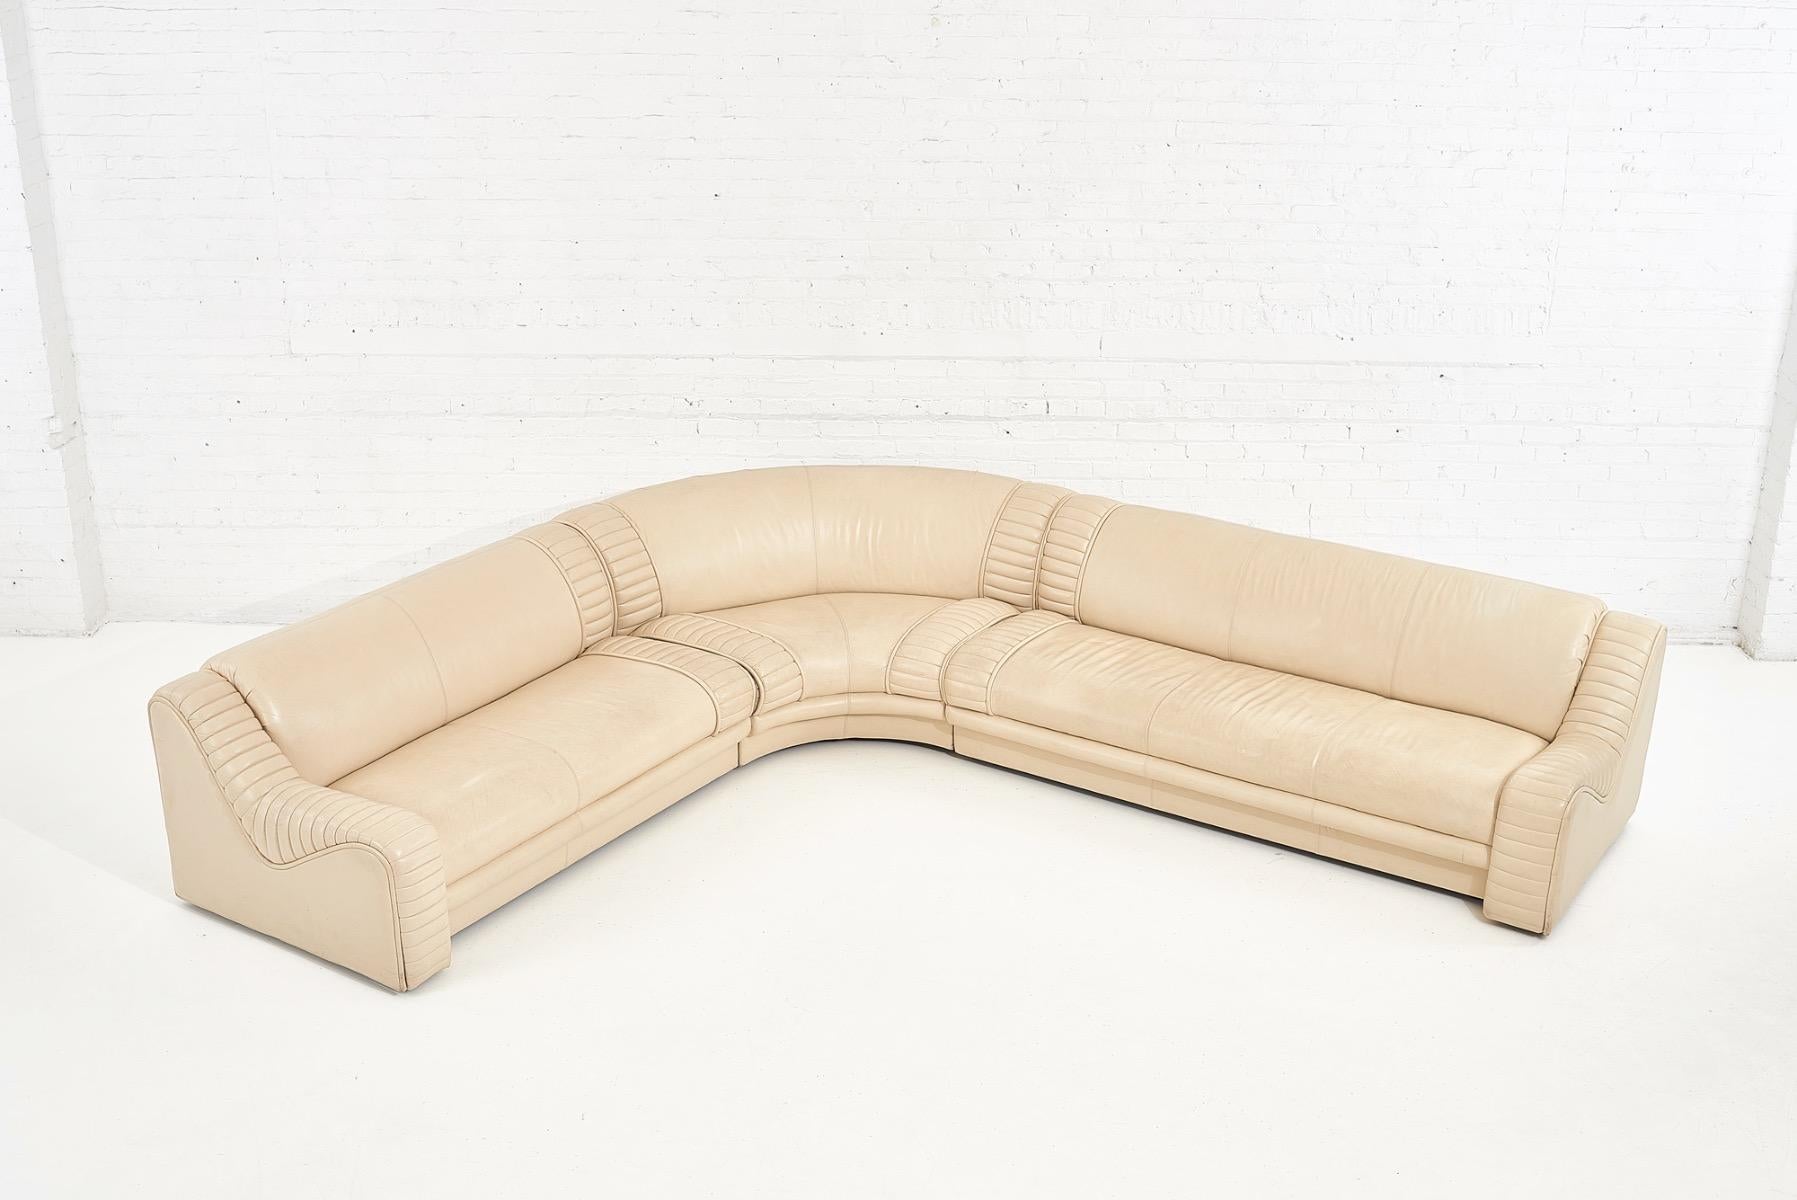 1970’s Italian Casa Bella leather sectional sofa. Original leather is in great condition.